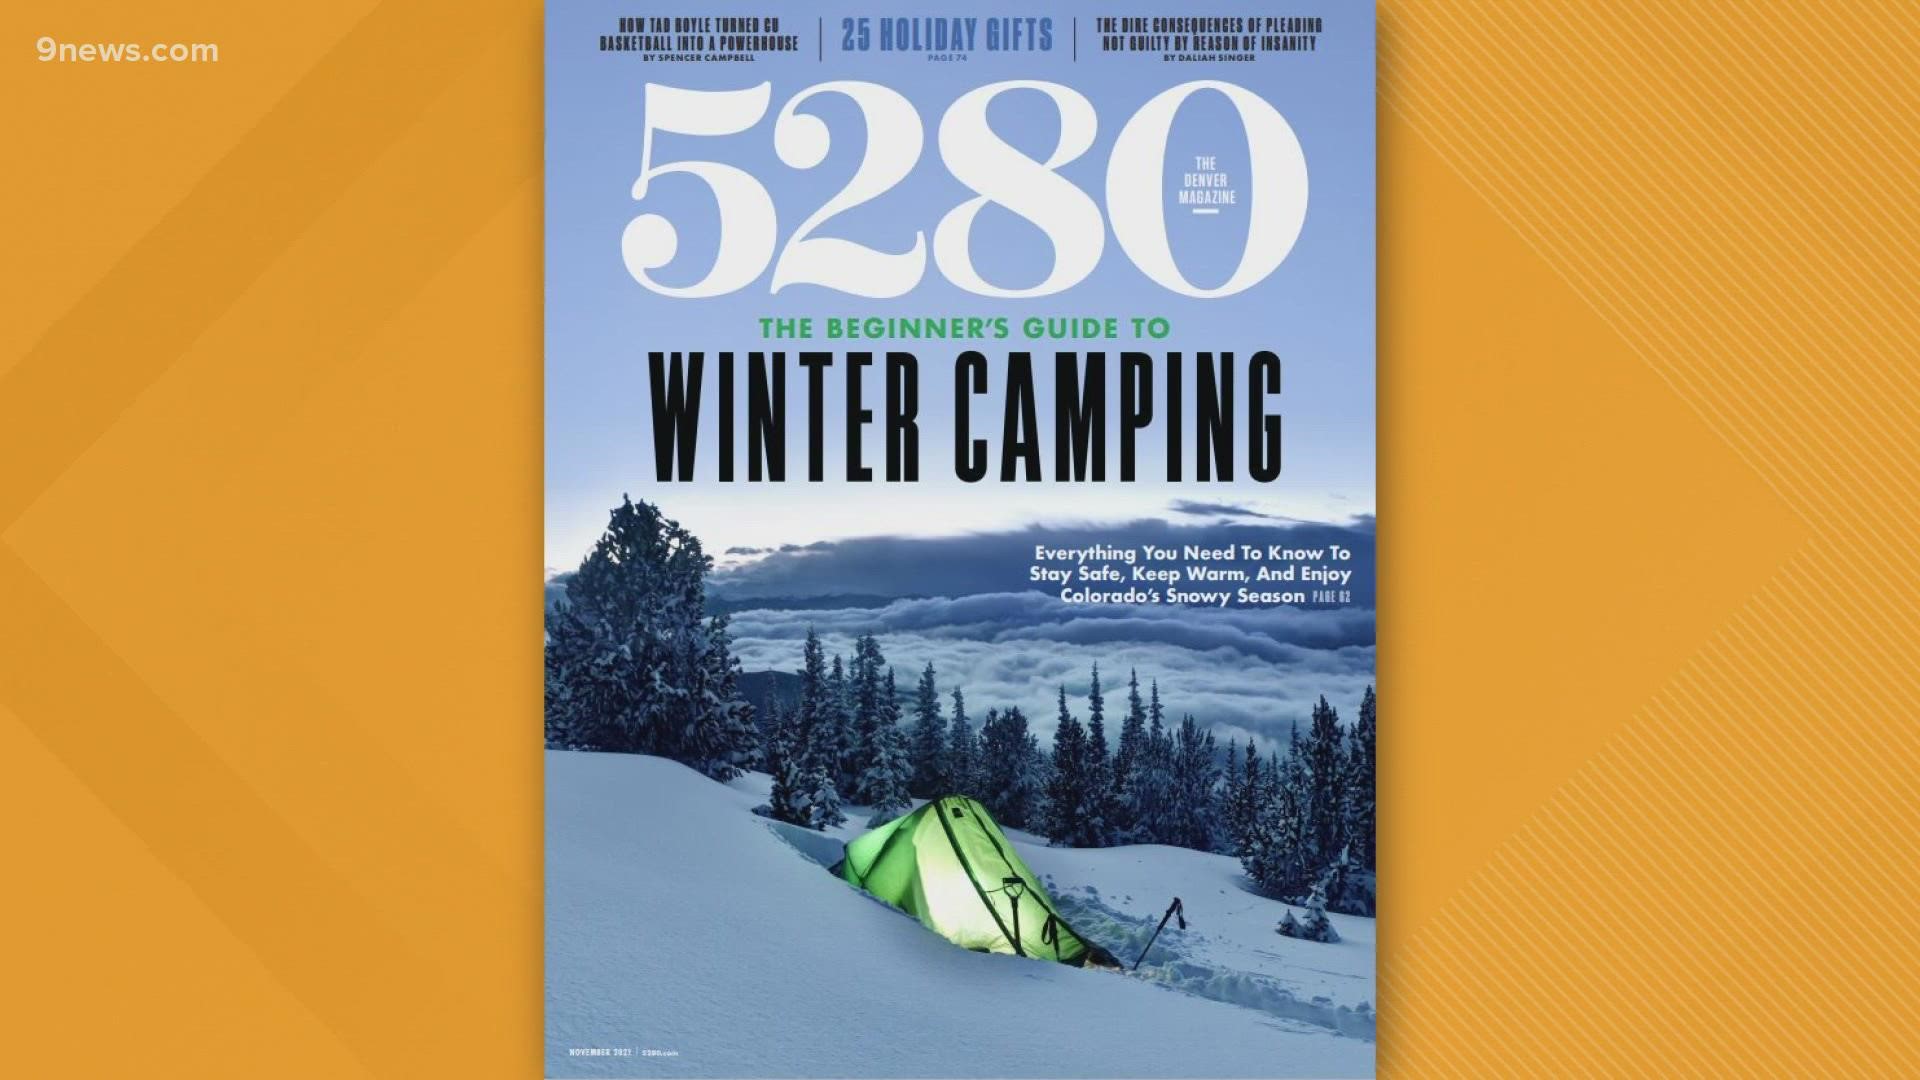 It's getting cooler but that doesn't mean camping has to come to a stop. 5280 Magazine's latest issue offers a beginner's guide to cold-weather camping.